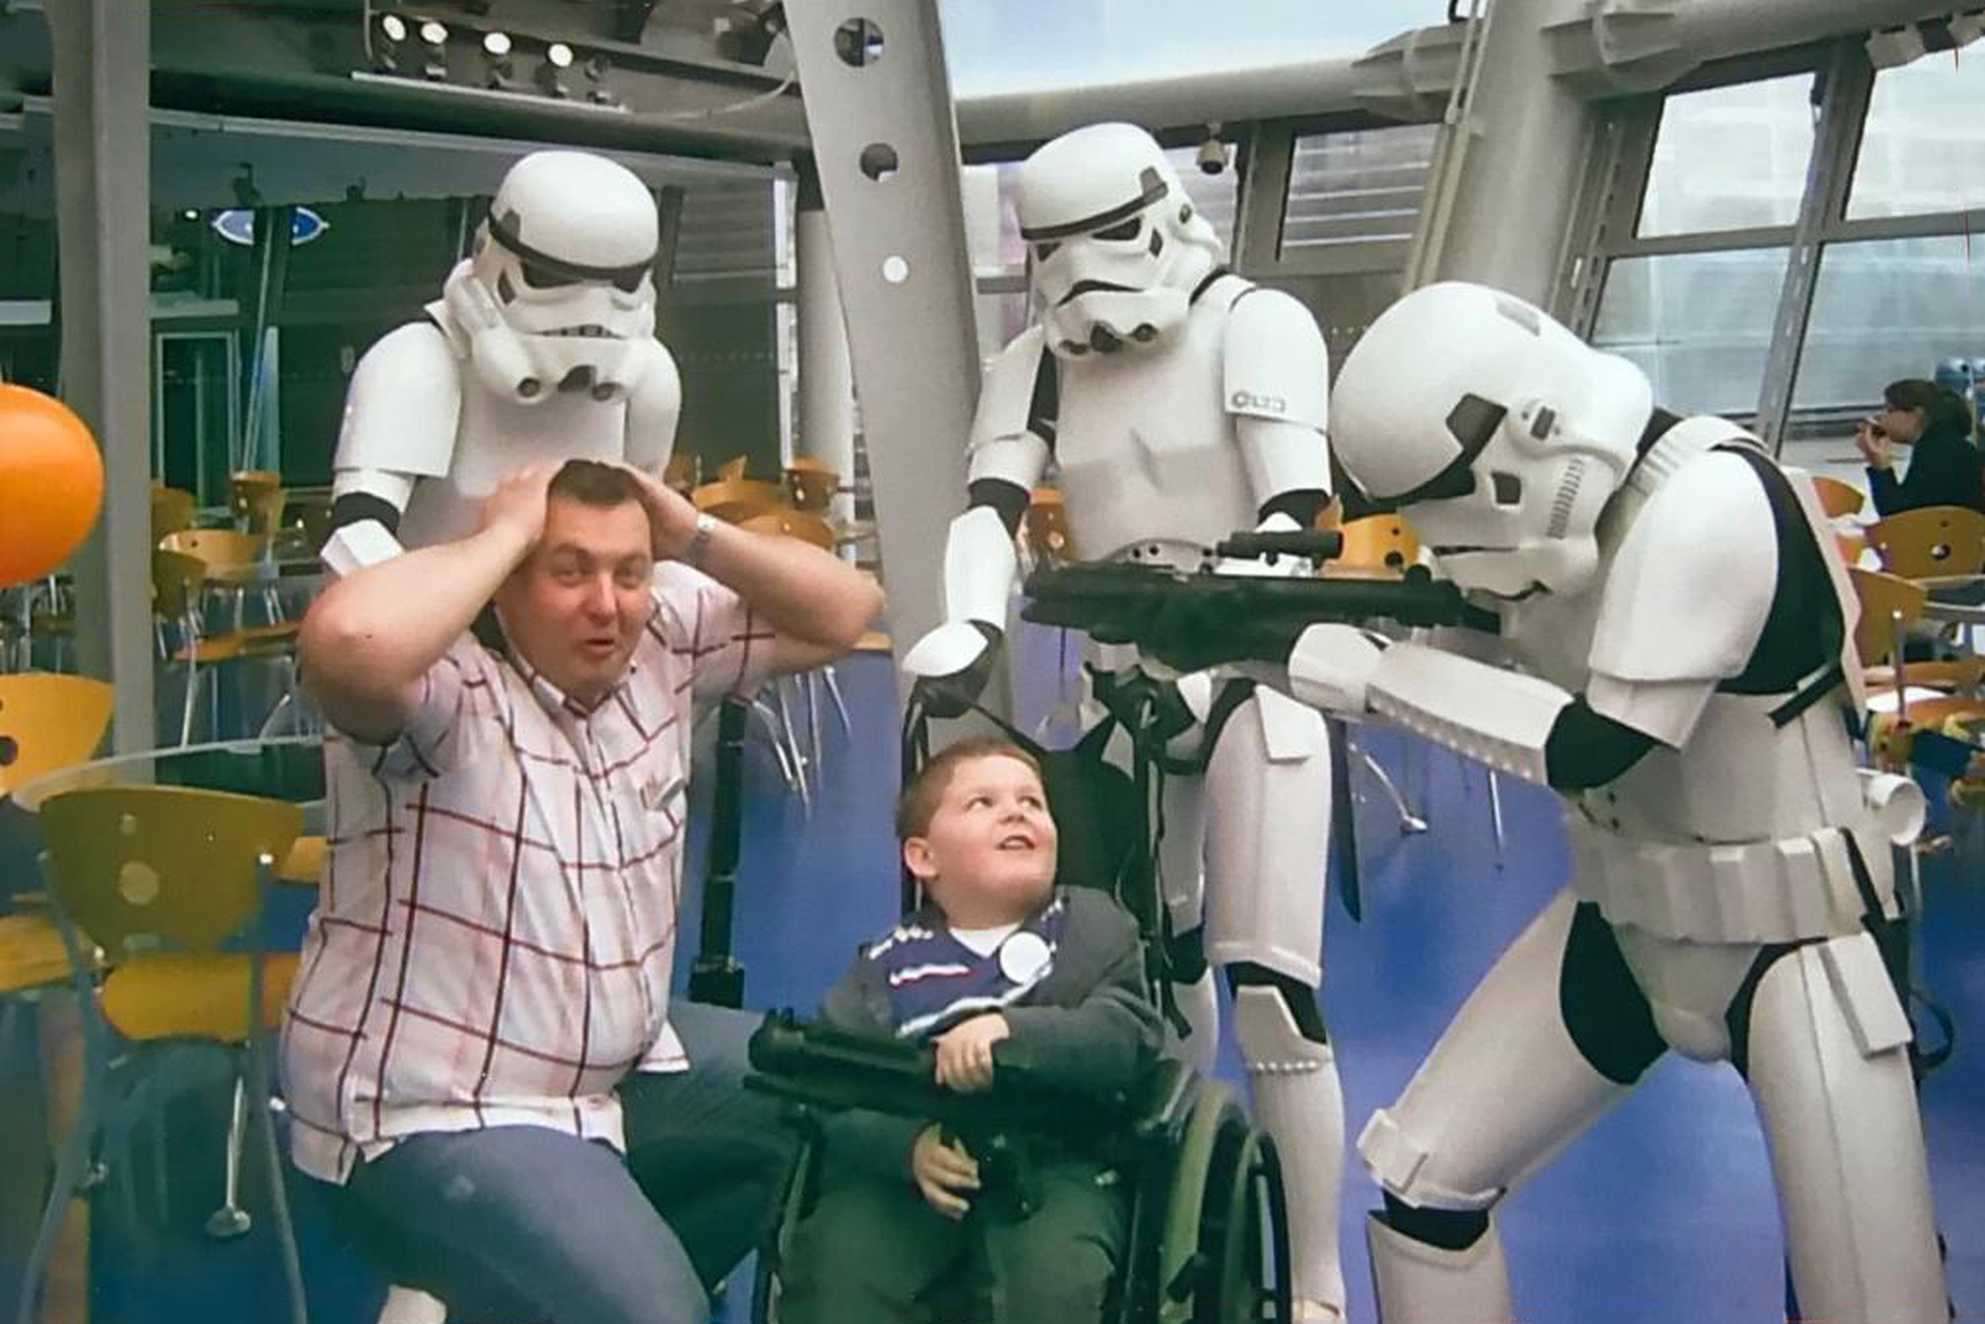 Jacob and his dad surrounded by Stormtroopers during his wish.